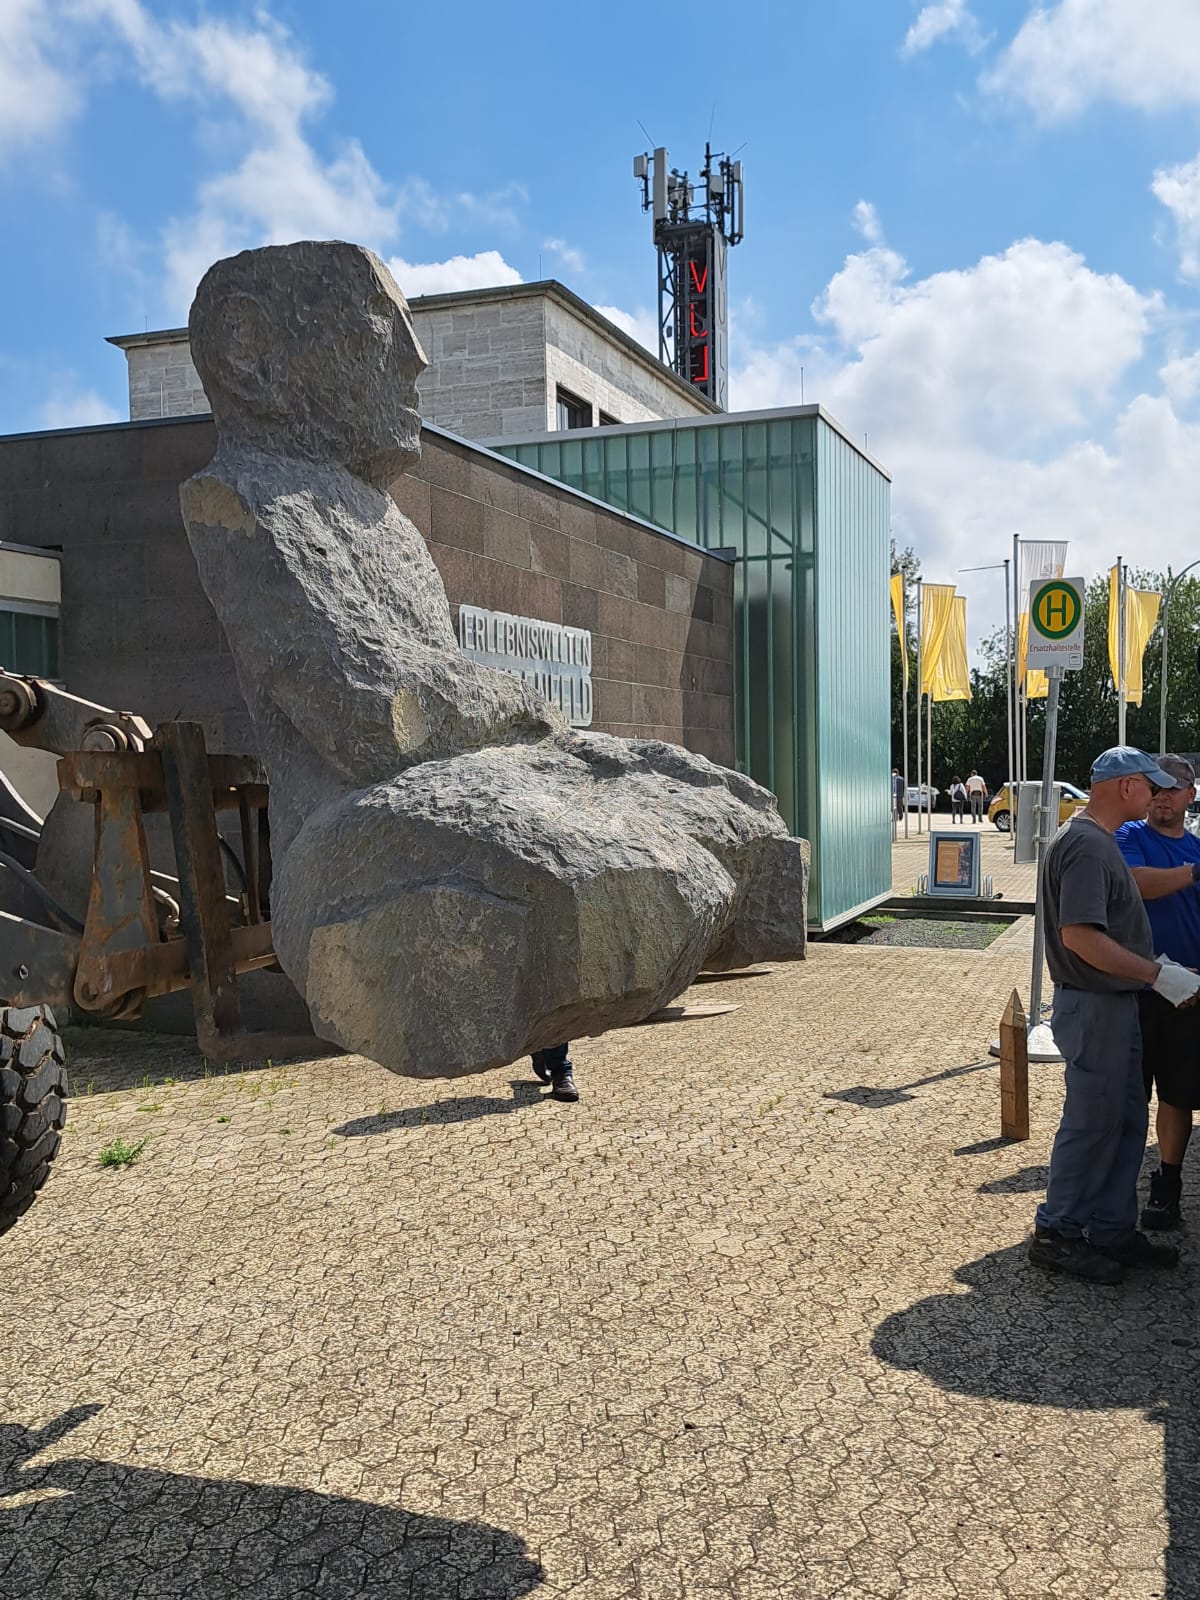 Transporting the sculptures